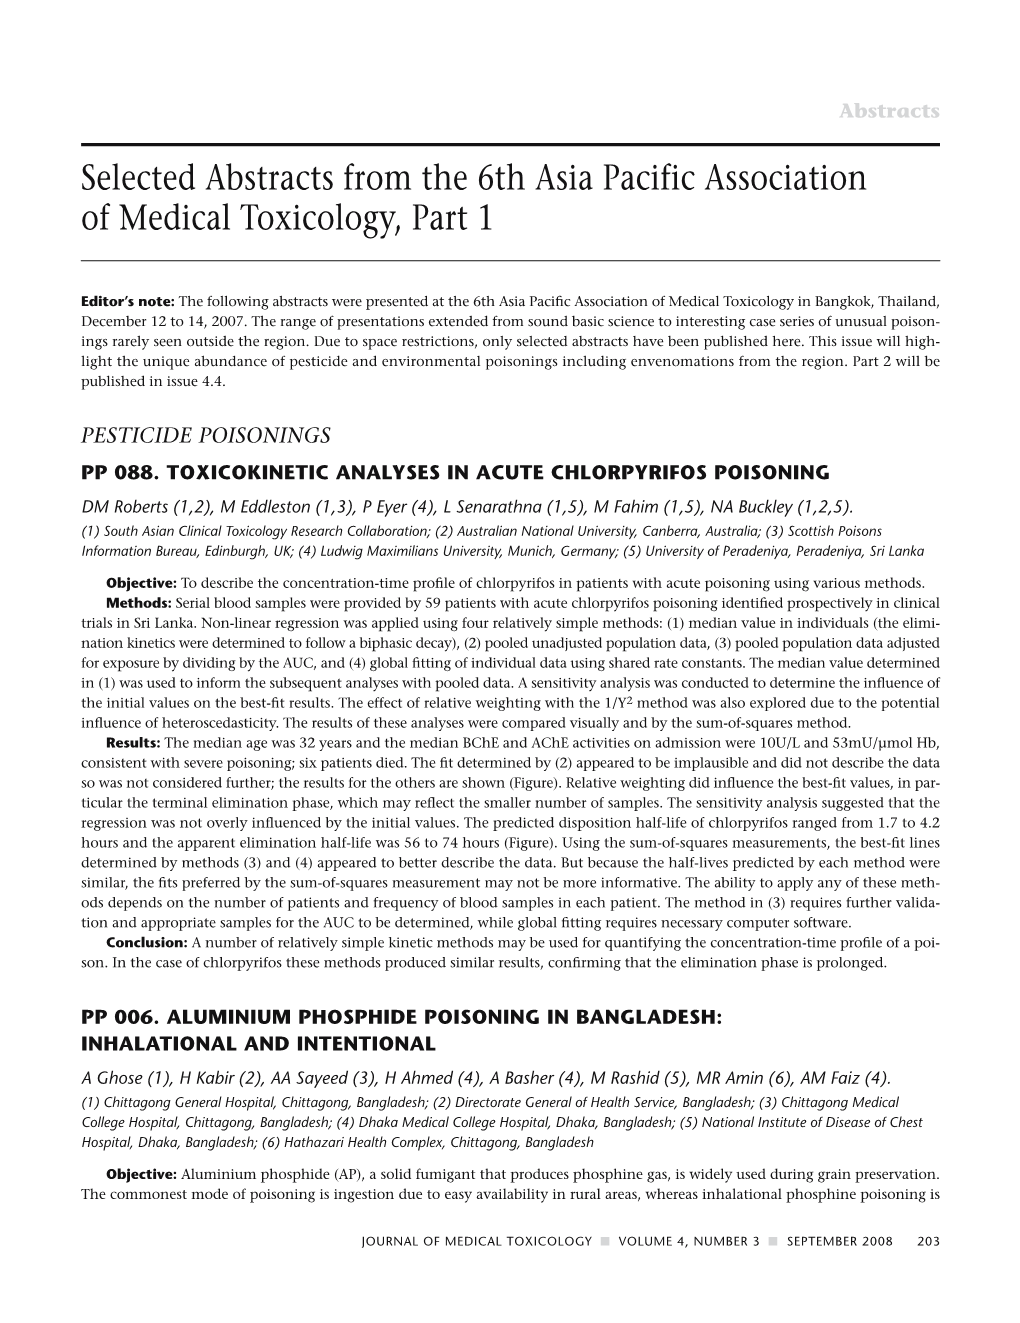 Selected Abstracts from the 6Th Asia Pacific Association of Medical Toxicology, Part 1